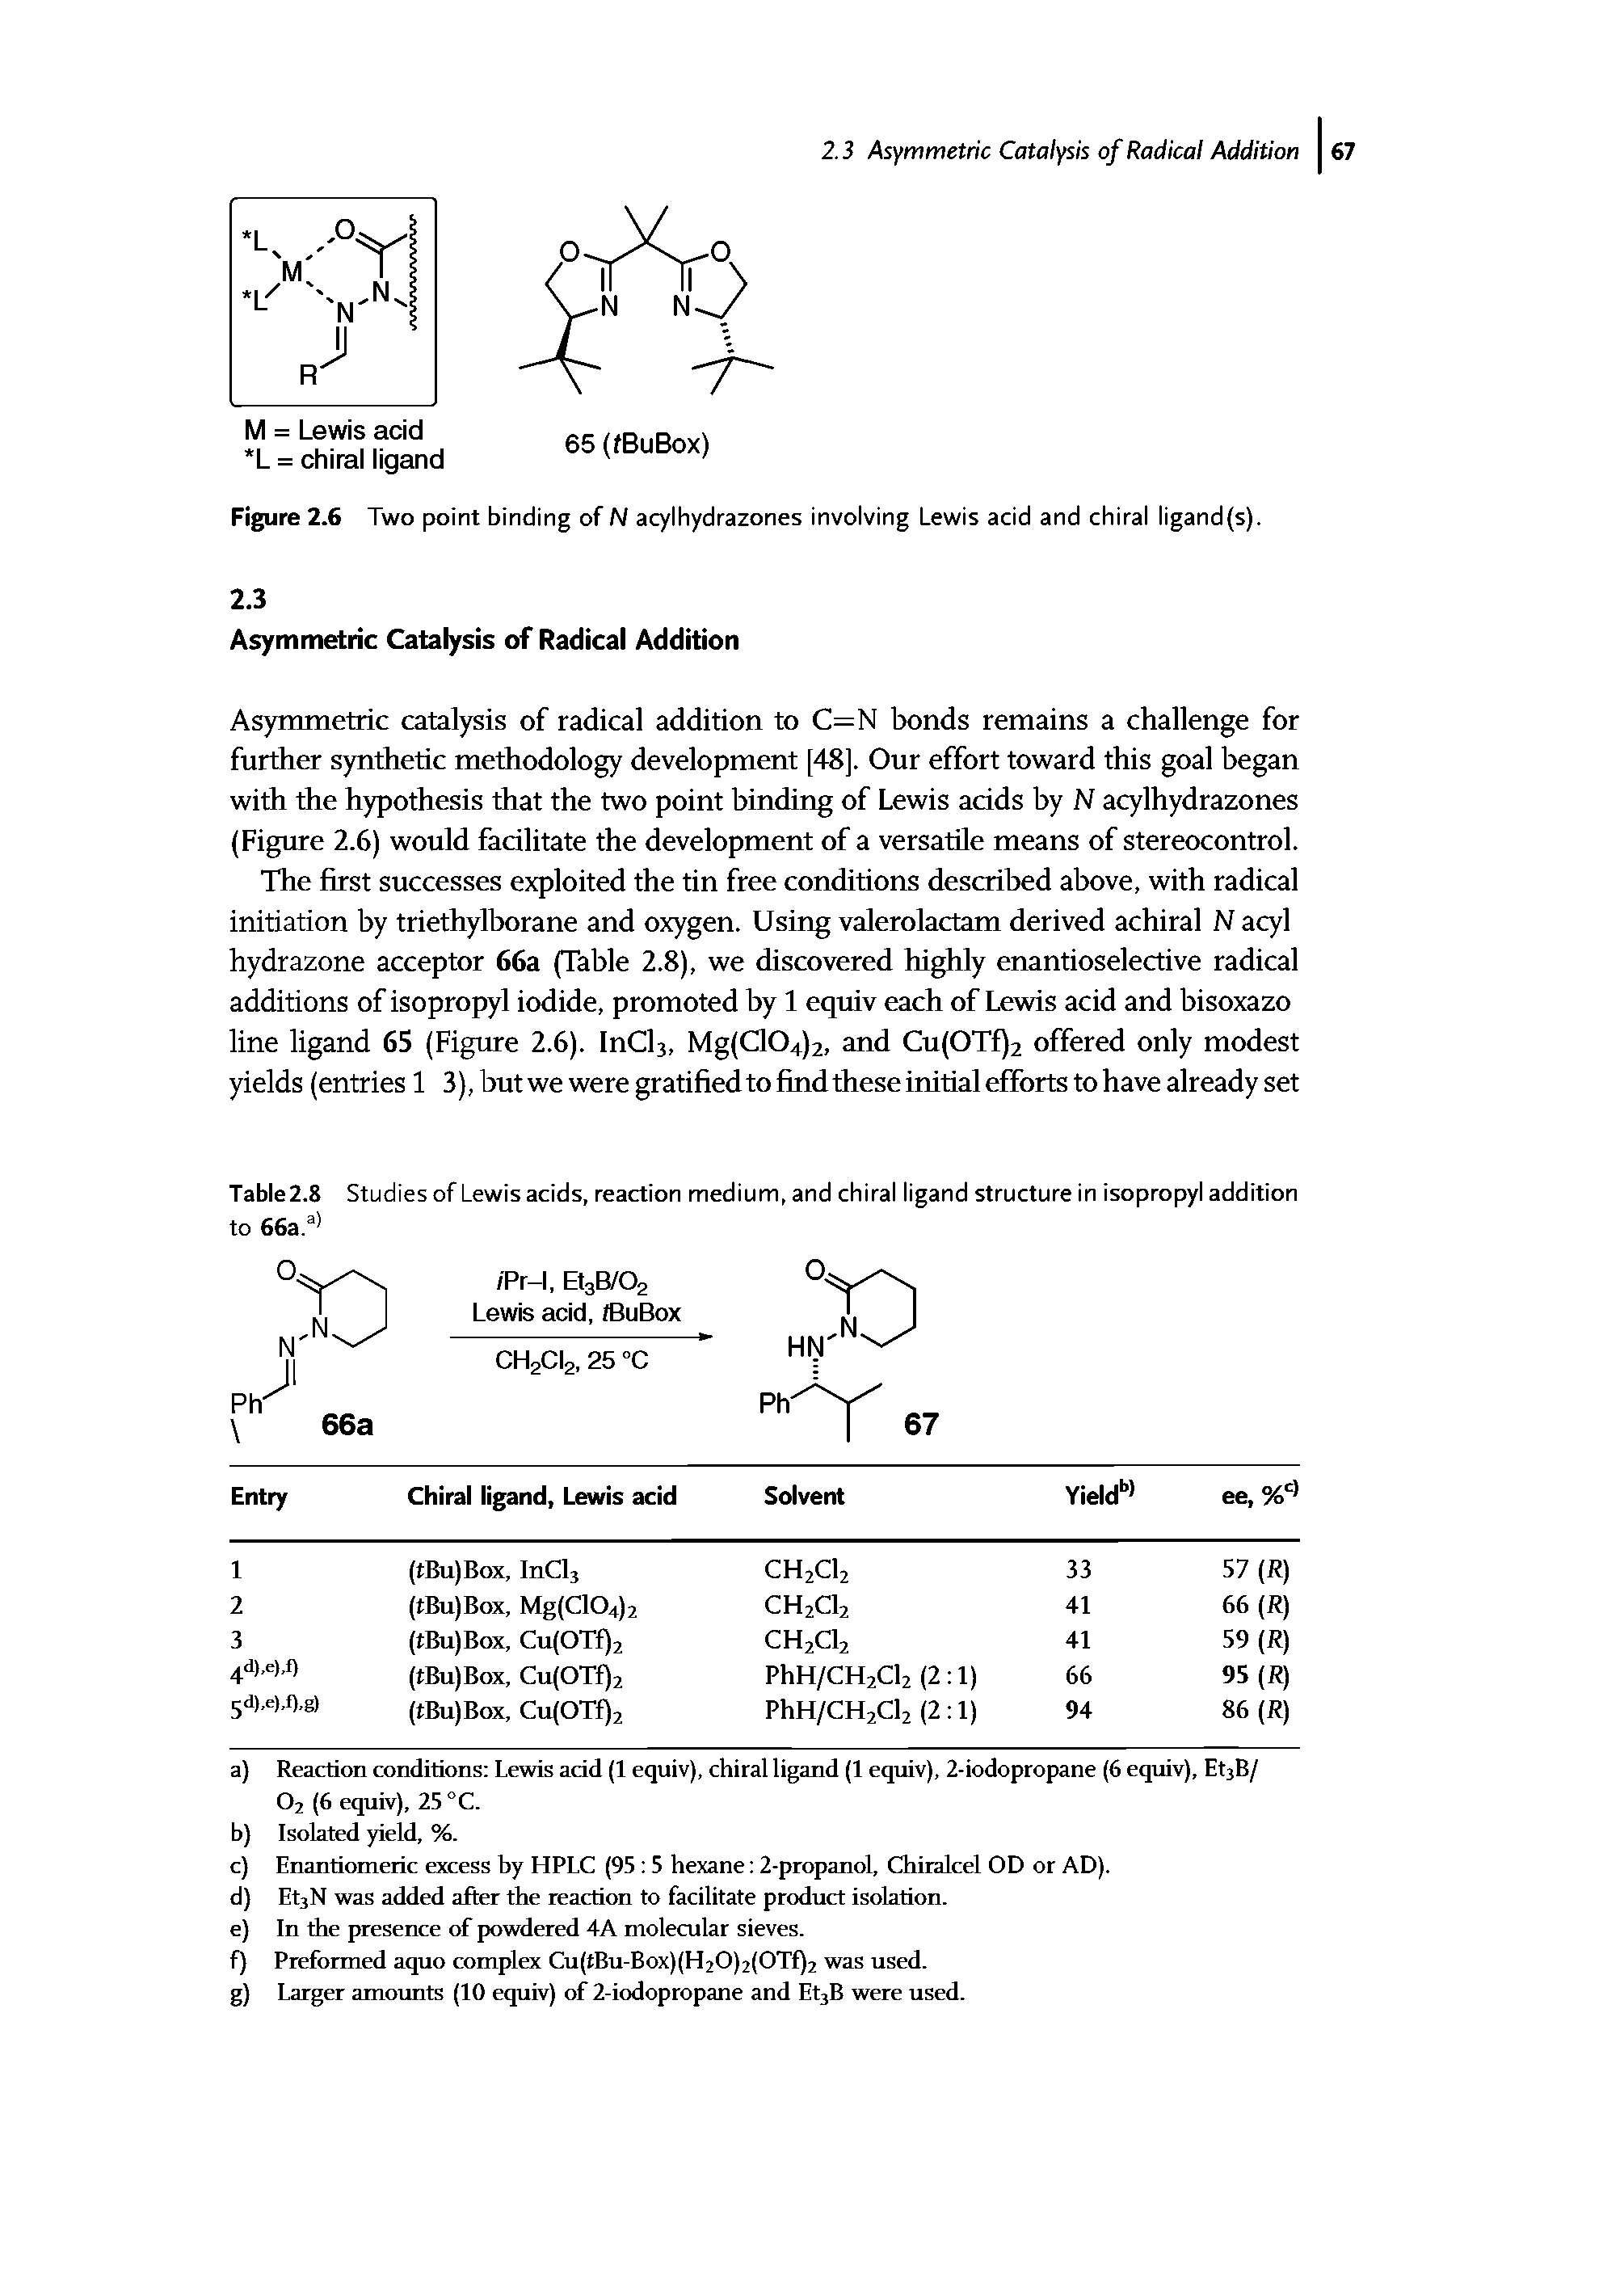 Table 2.8 Studies of Lewis acids, reaction medium, and chiral ligand structure in isopropyl addition to 663. ...